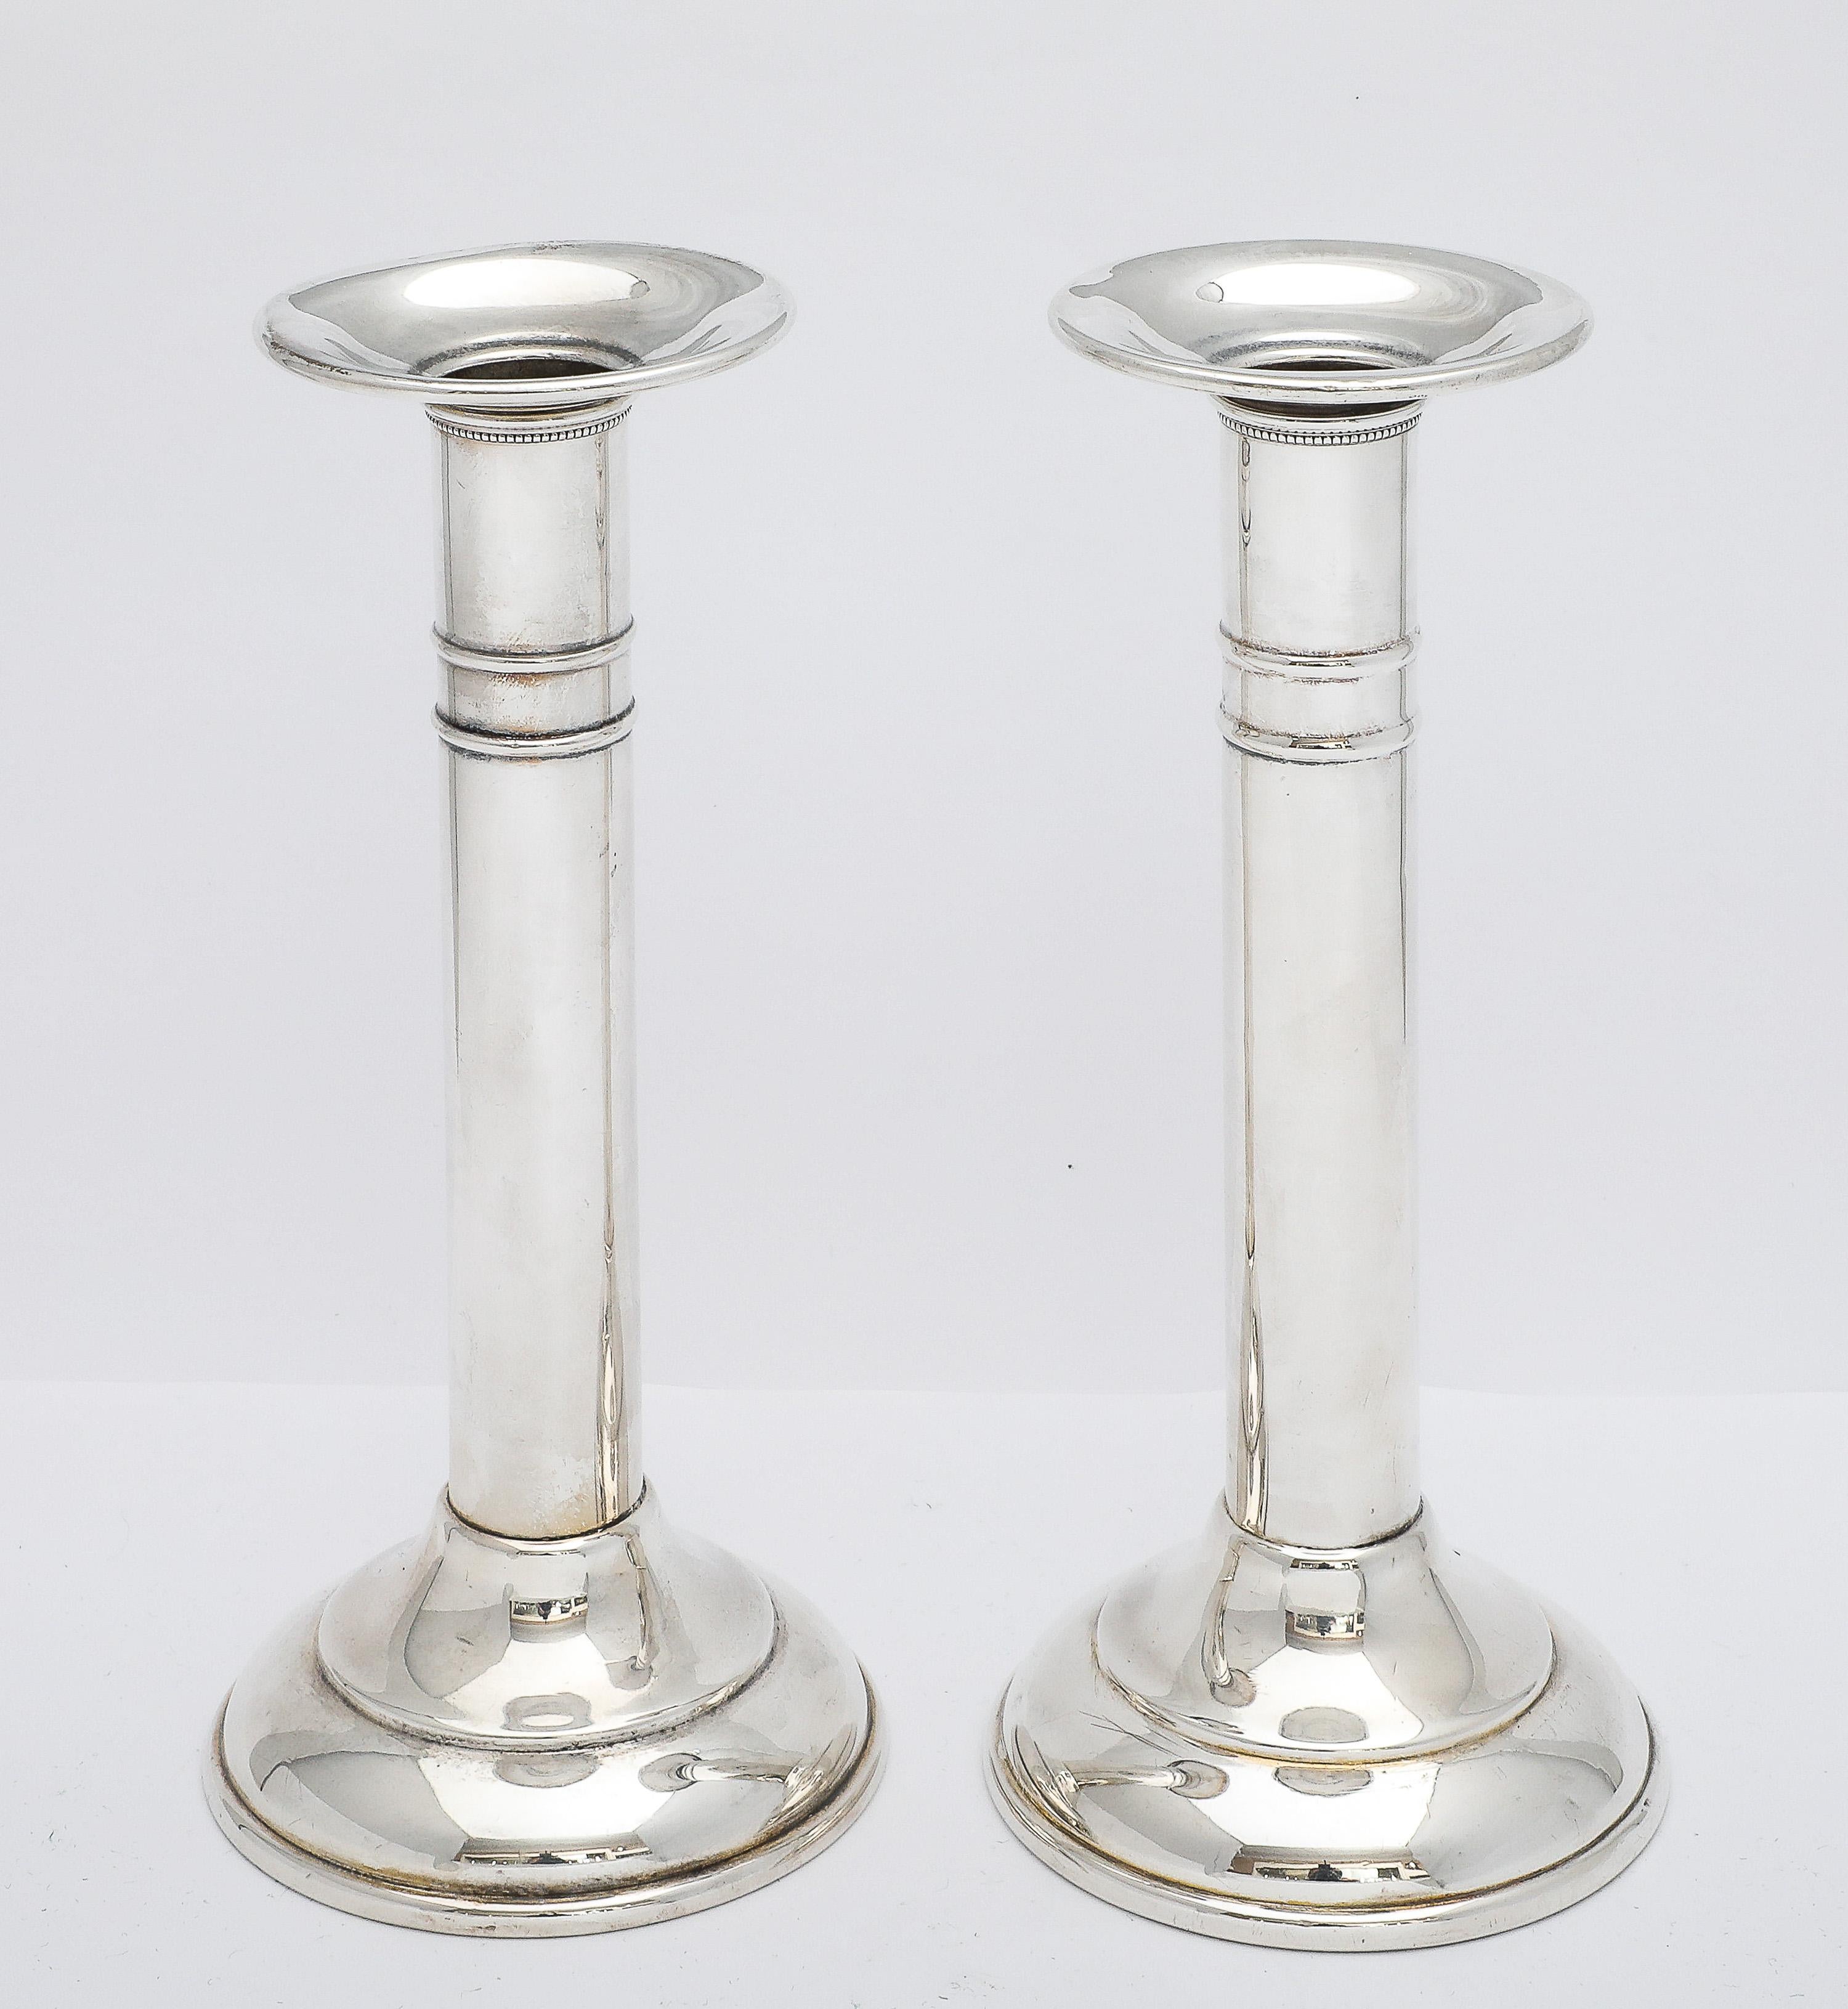 Pair of Edwardian Period Sterling Silver Candlesticks 7